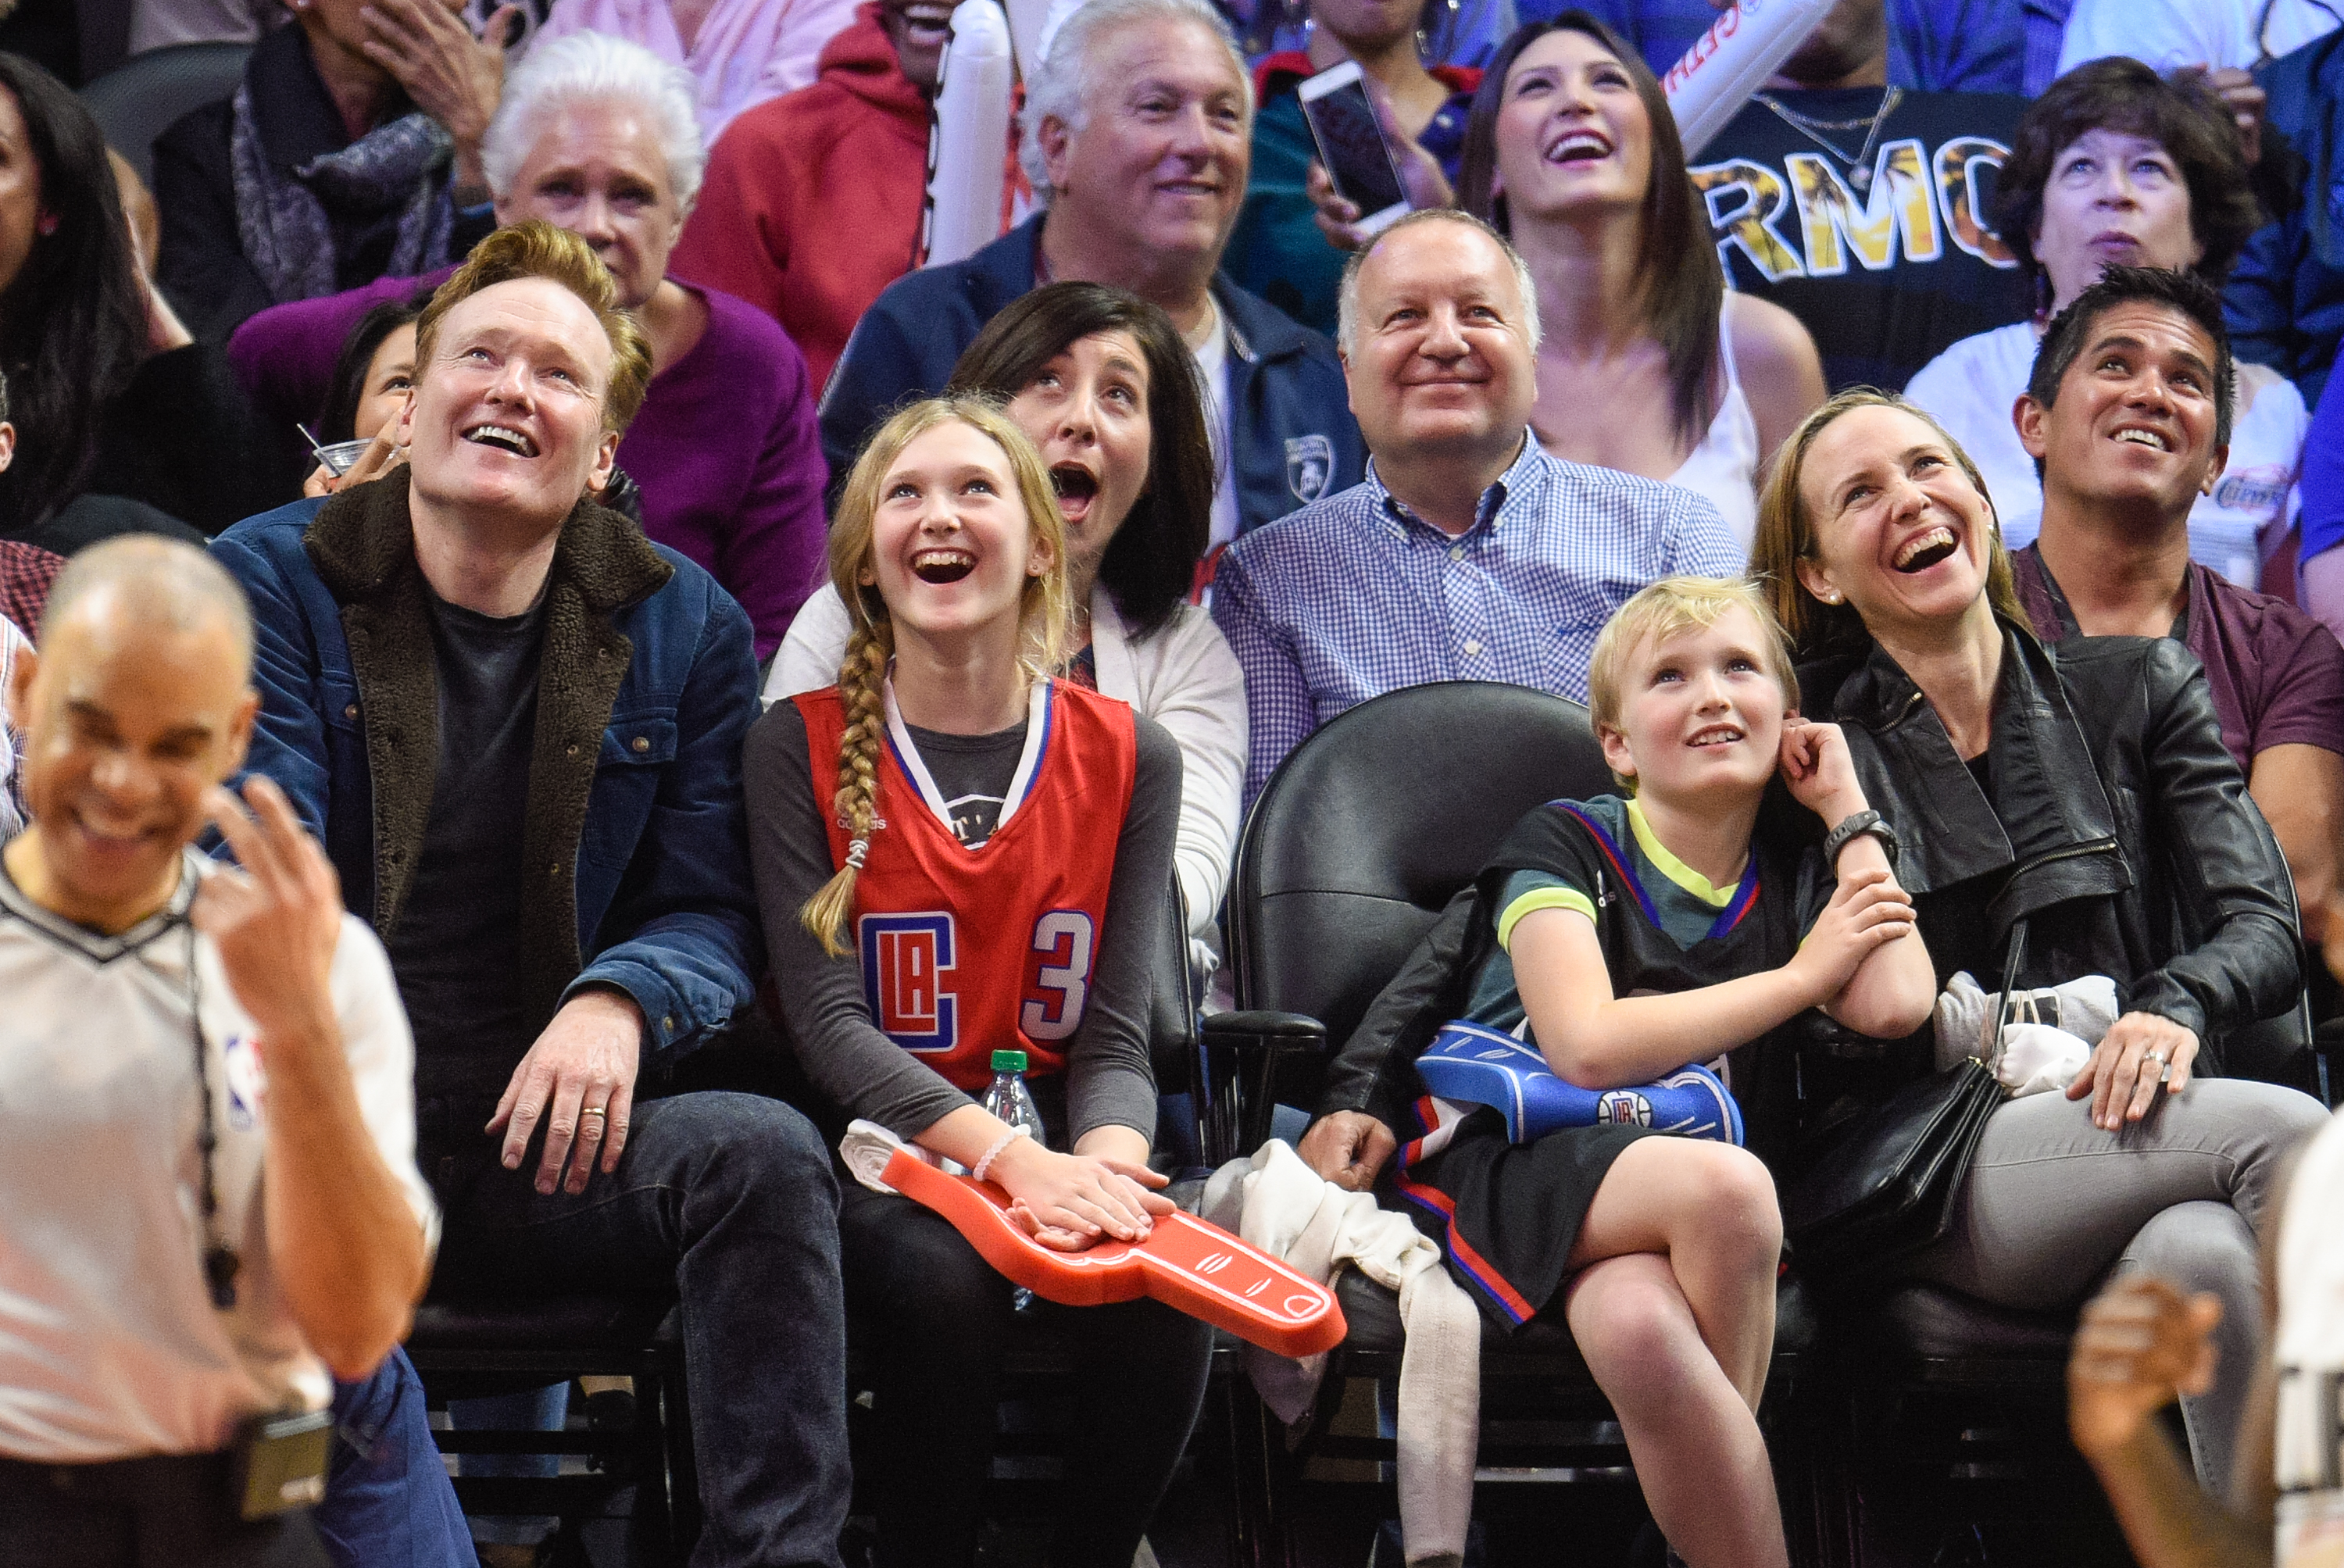 Conan O'Brien, Neve O'Brien, Beckett O'Brien, and Liza Powel at a basketball game on January 18, 2016, in Los Angeles | Source: Getty Images